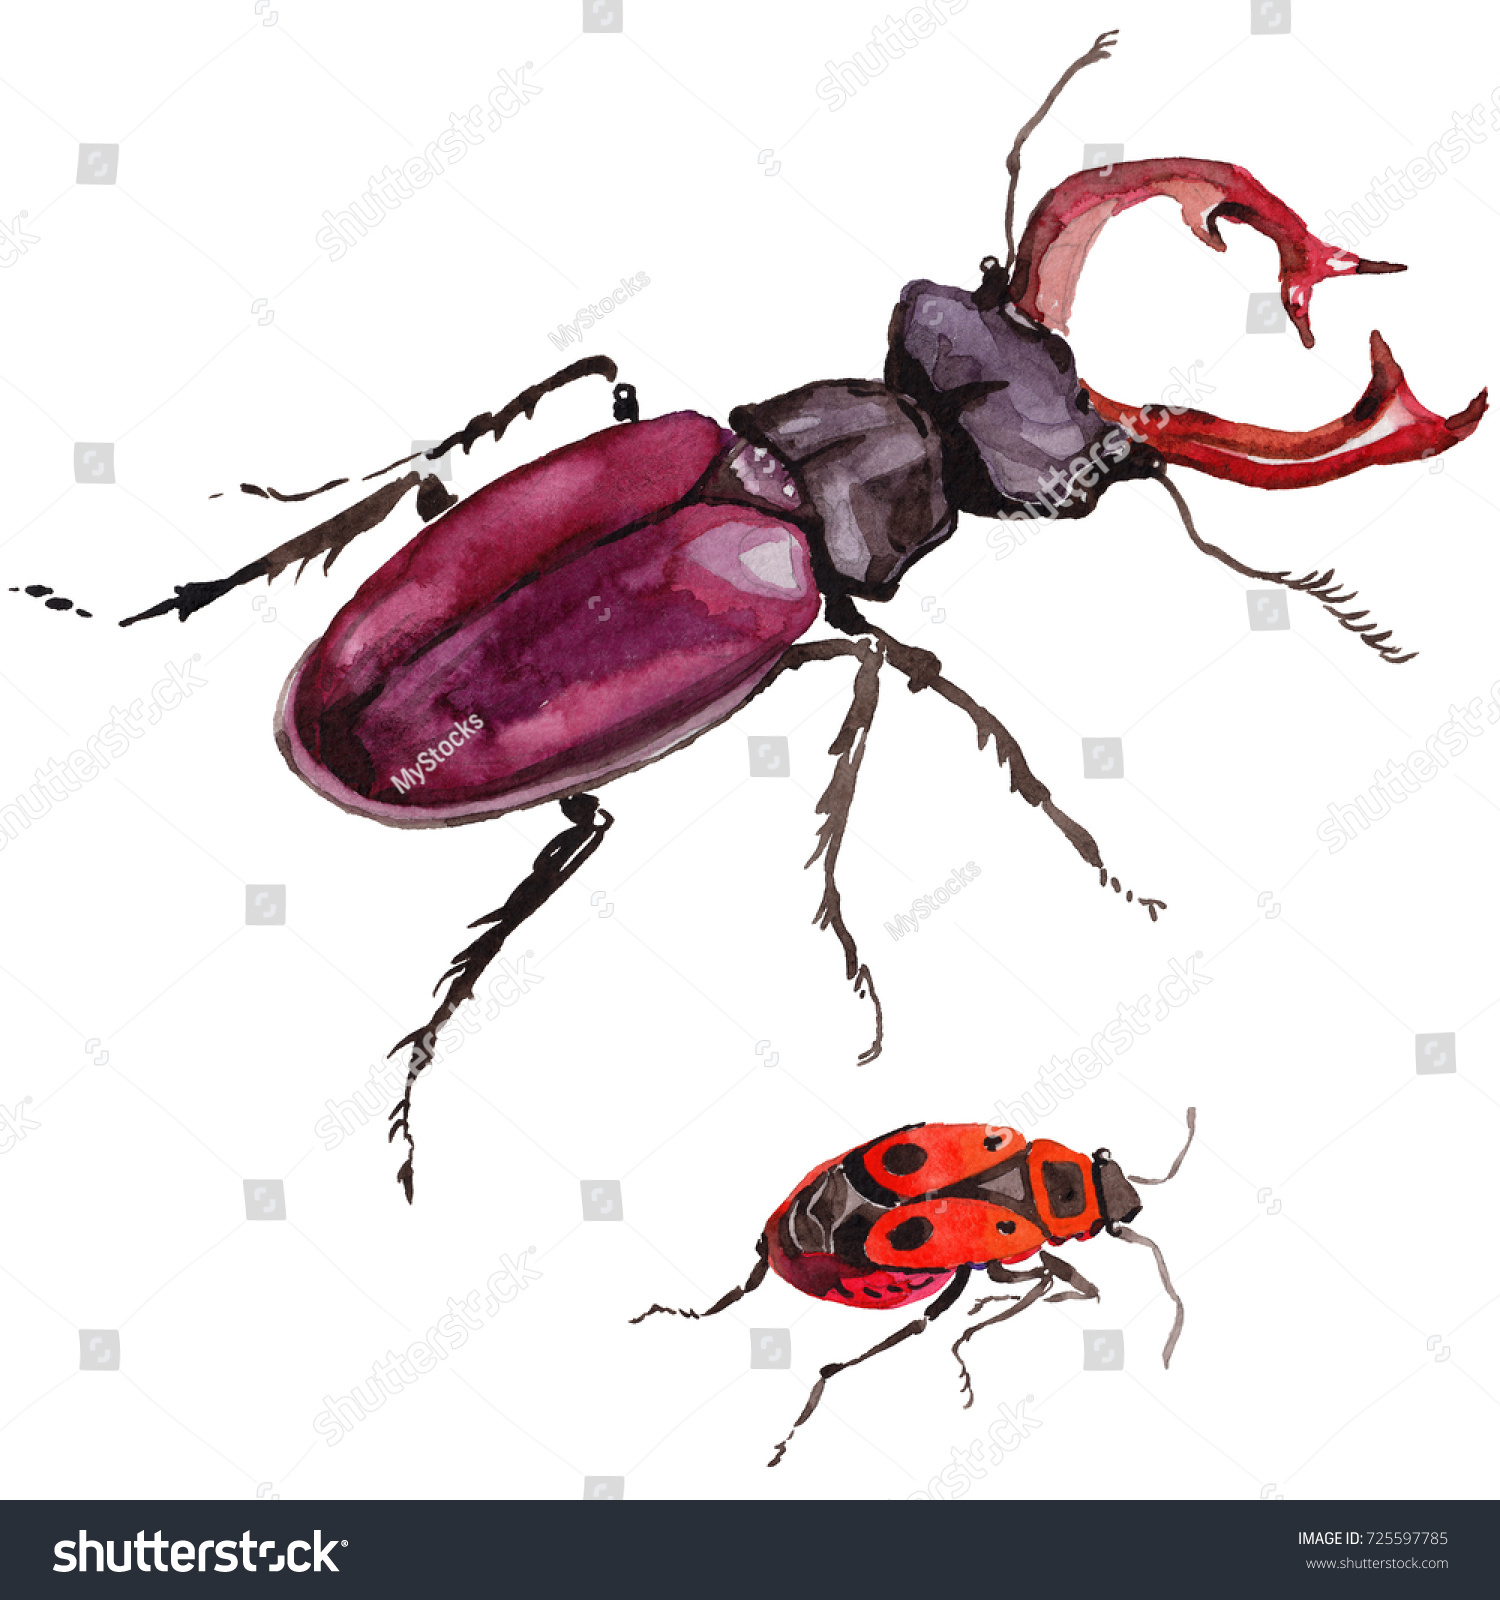 Exotic Beetle Wild Insect Watercolor Style Stock Illustration ...